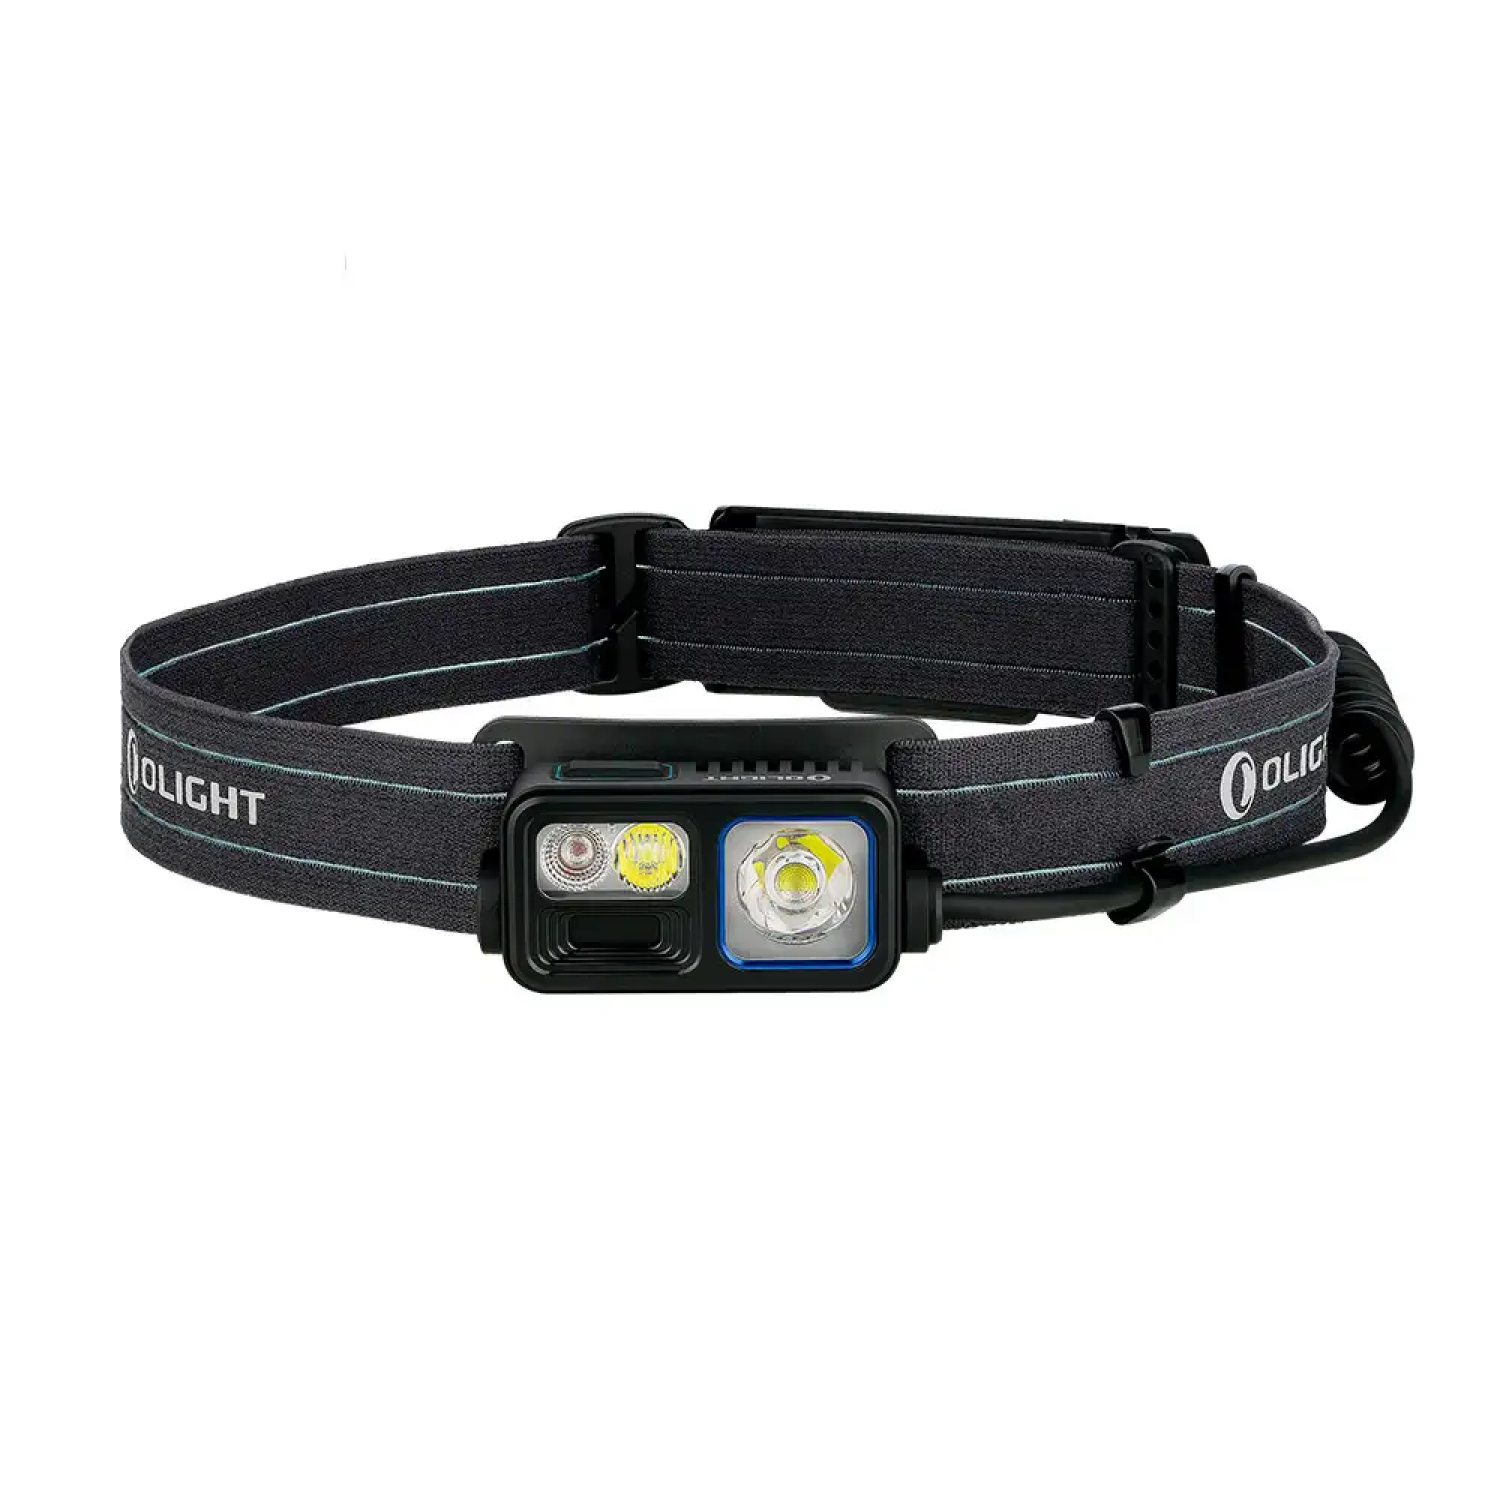 Image of the Array 2S Headlamp.